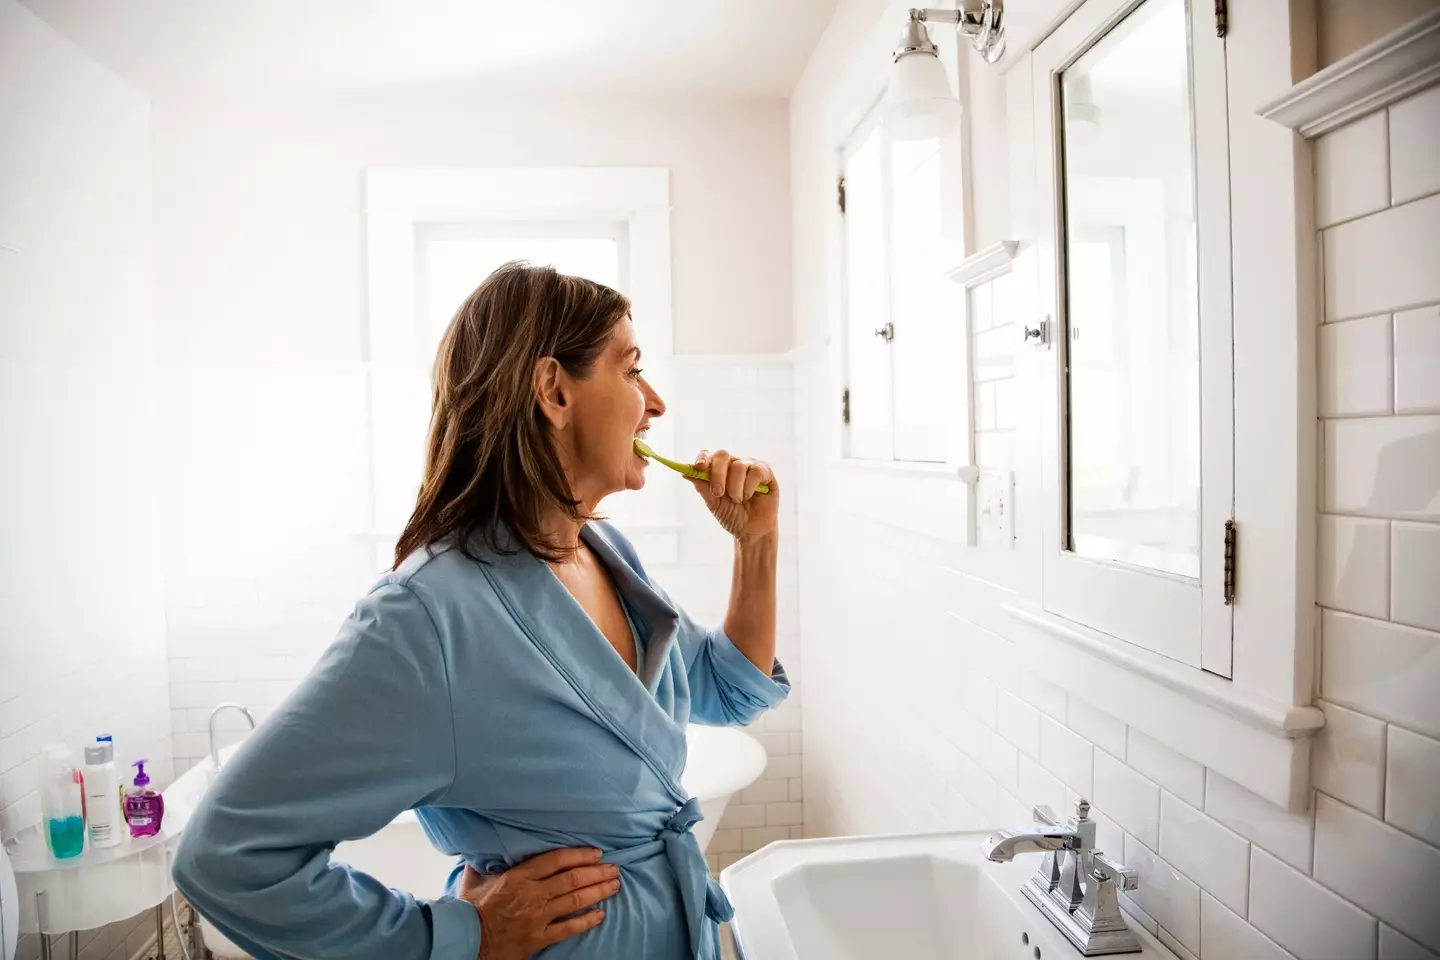 You shouldn't be brushing your teeth after being sick, eating breakfast or eating sweets.